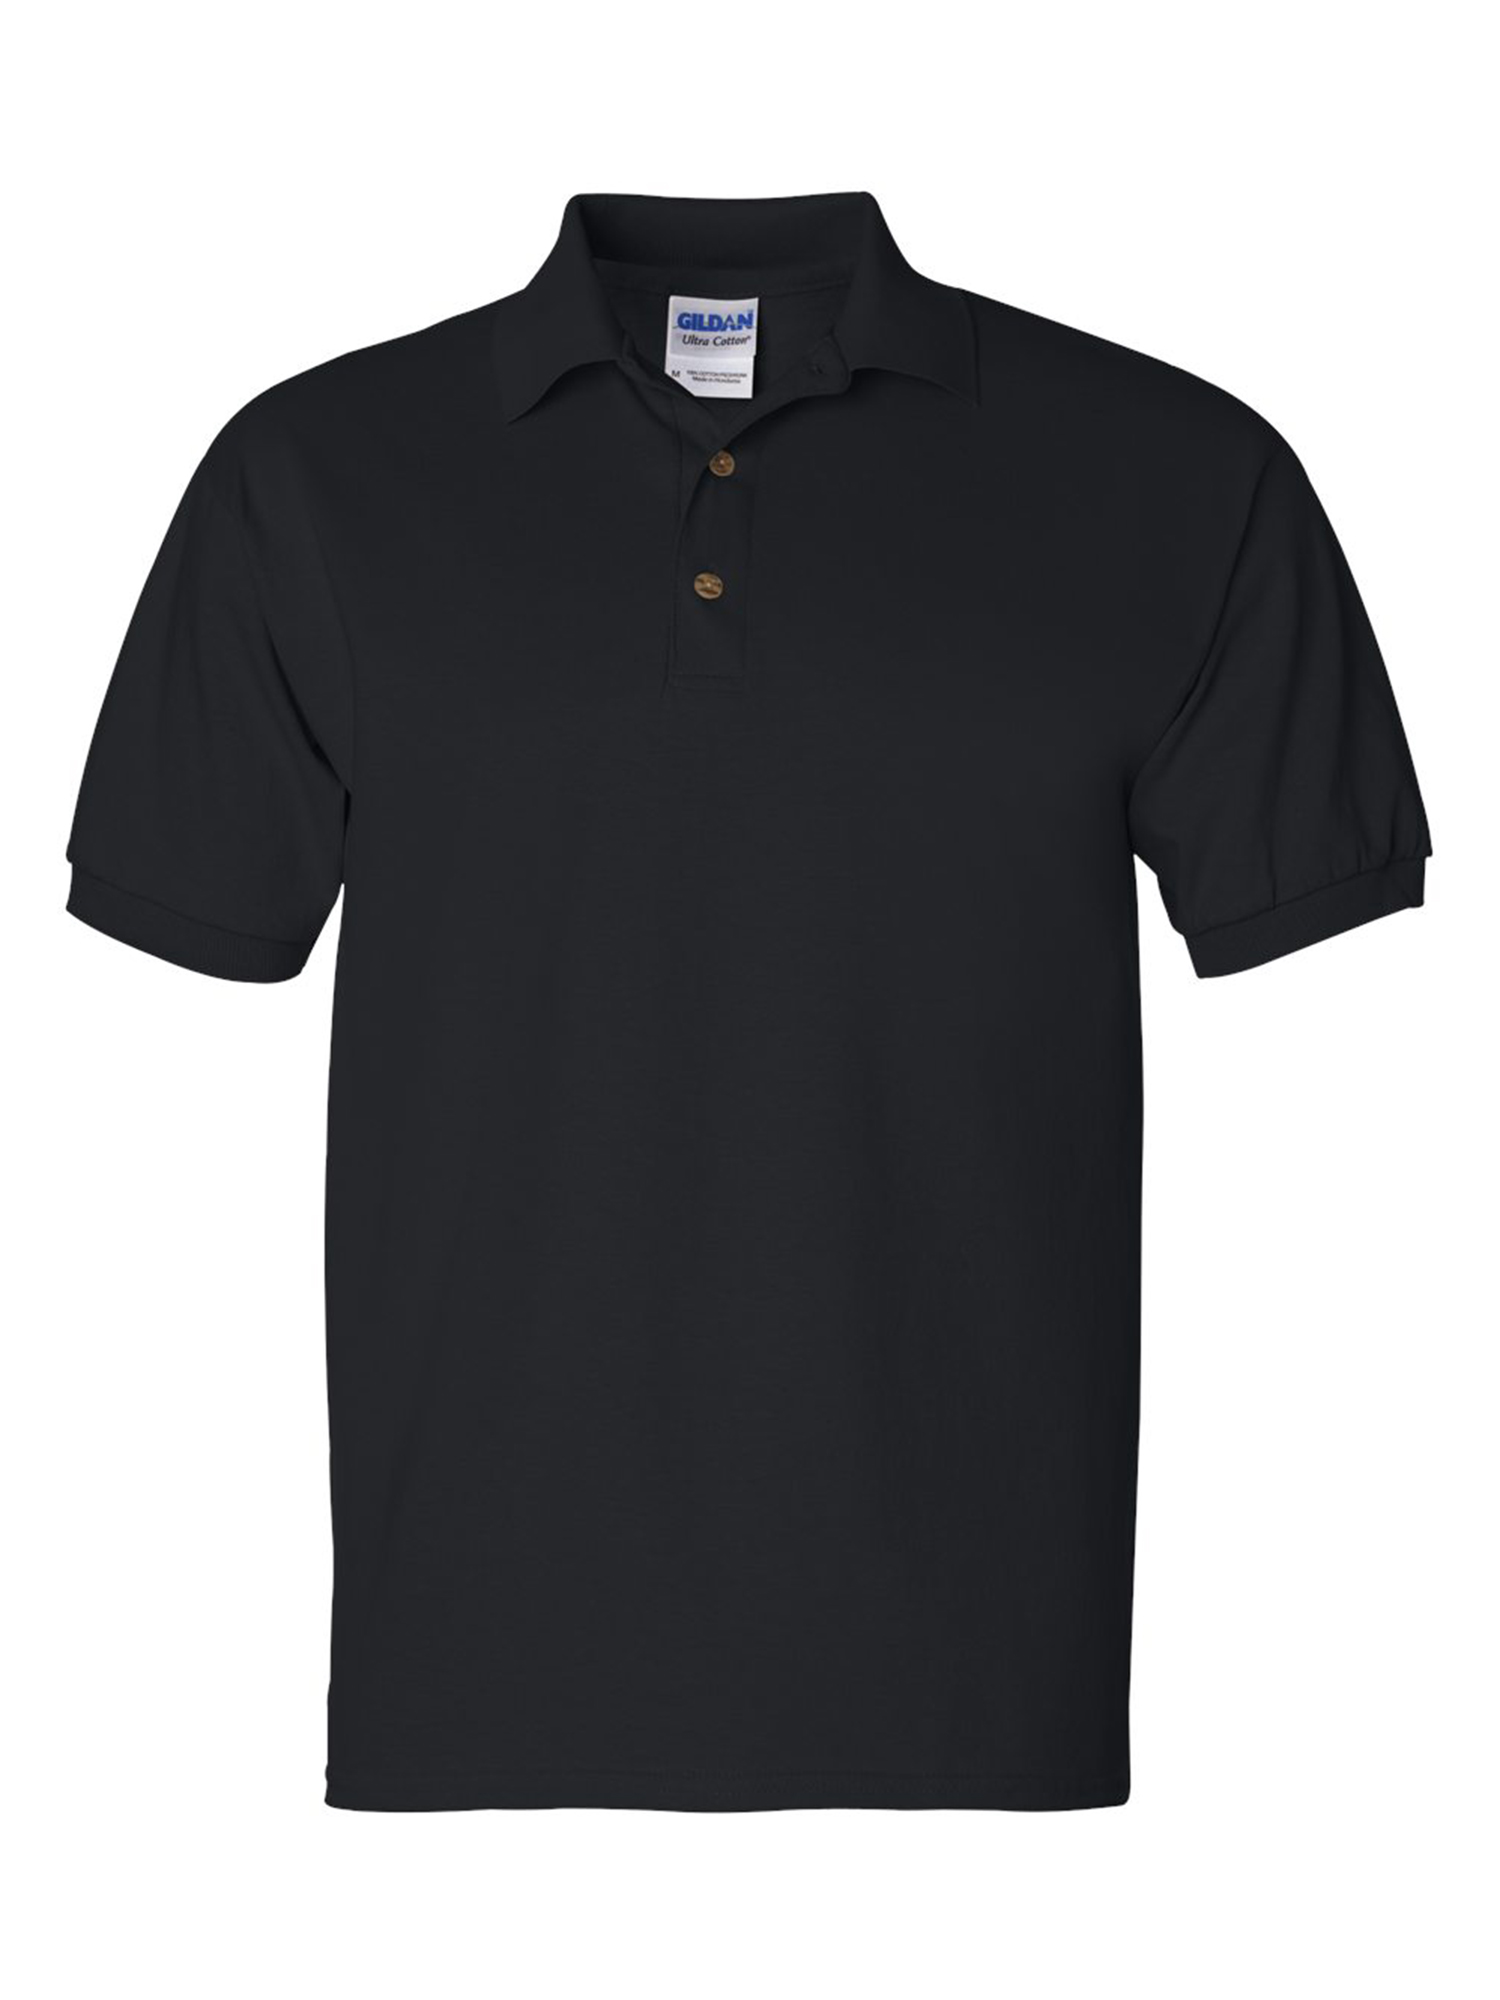 Polo Shirts for Men Gildan Jersey Polo Sport Shirt 8800 S M L XL 2XL Button Down T Shirts for Mens Polo Shirts with Colors Business Casual School Black Shirts for Men - image 1 of 2